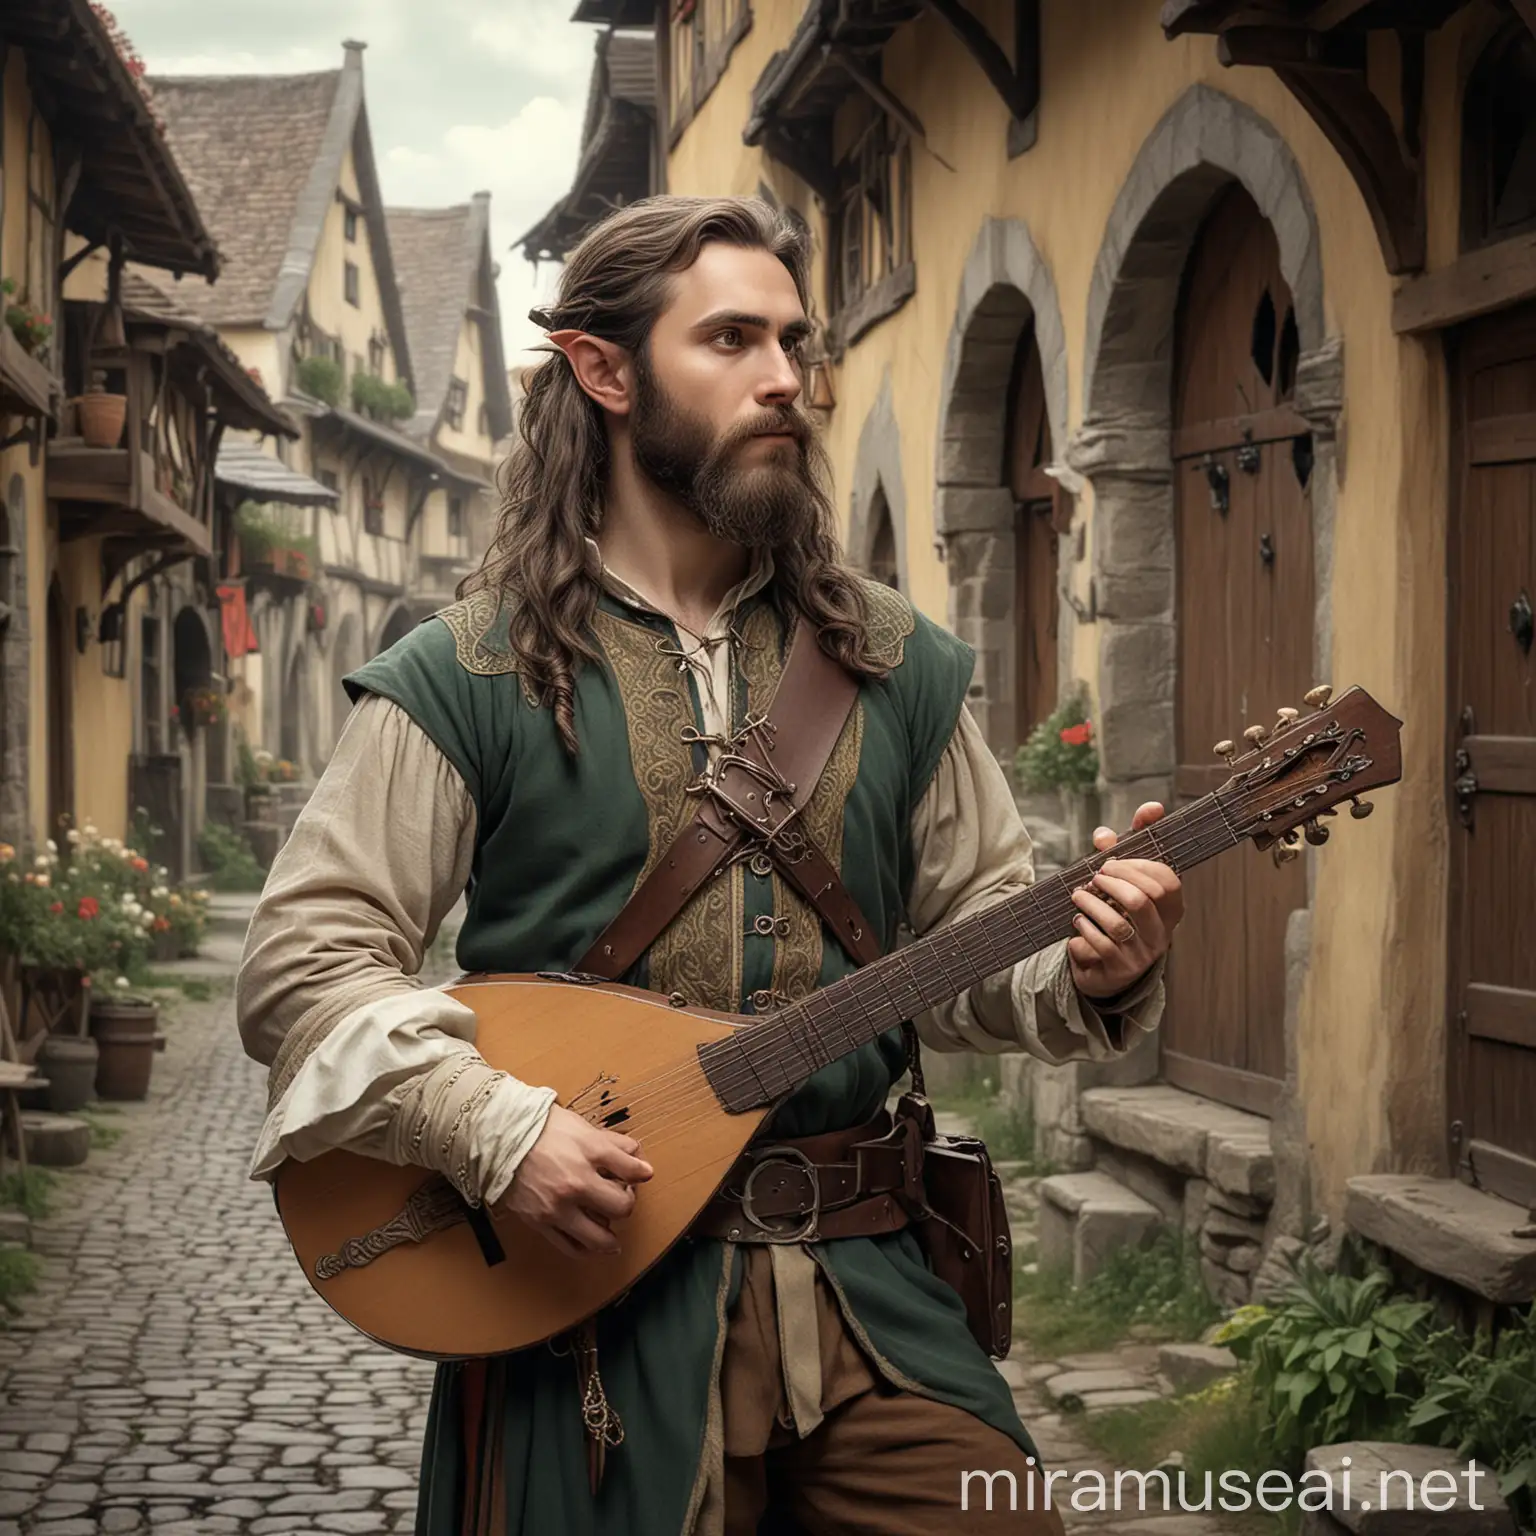 Medieval Village Bearded Half Elf Bard Playing Lute with Poniard Dagger